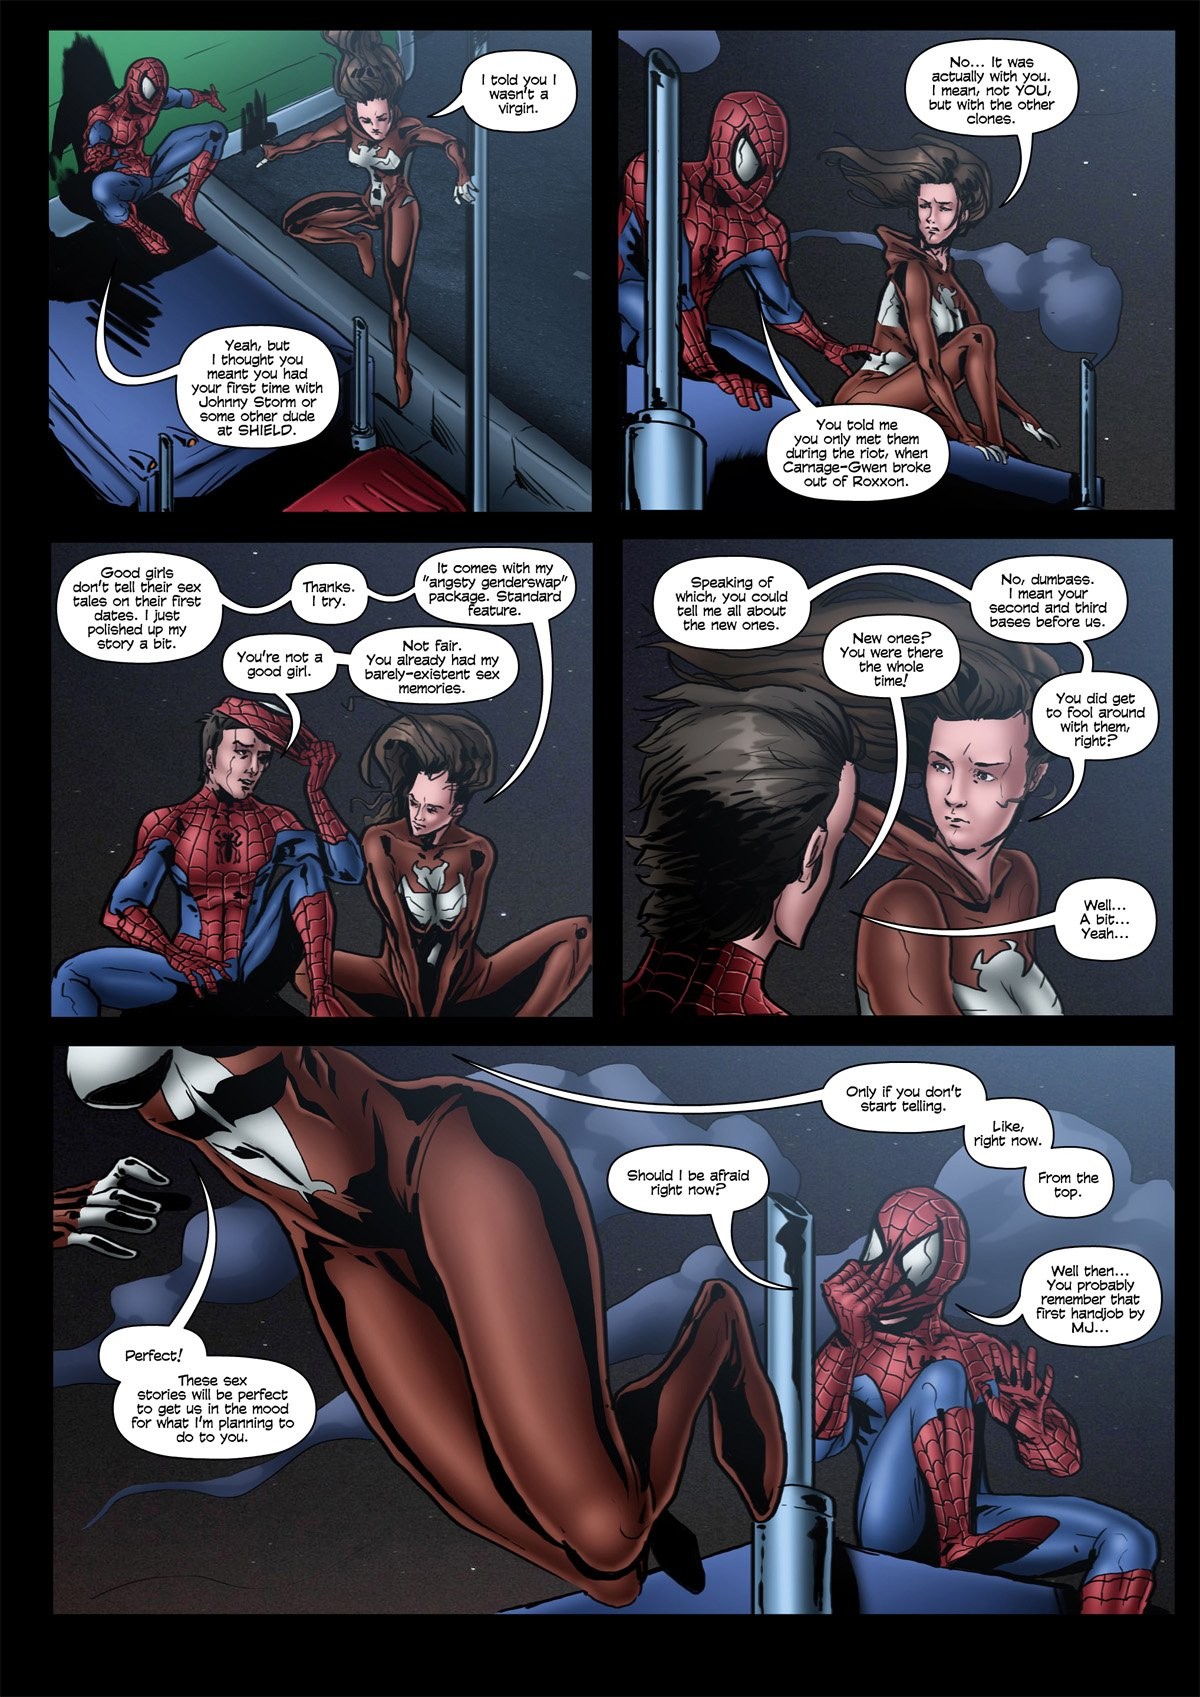 Ultimate Spider-Man XXX 7 - Spidercest - the stuff wet dreams are made of porn comic picture 5